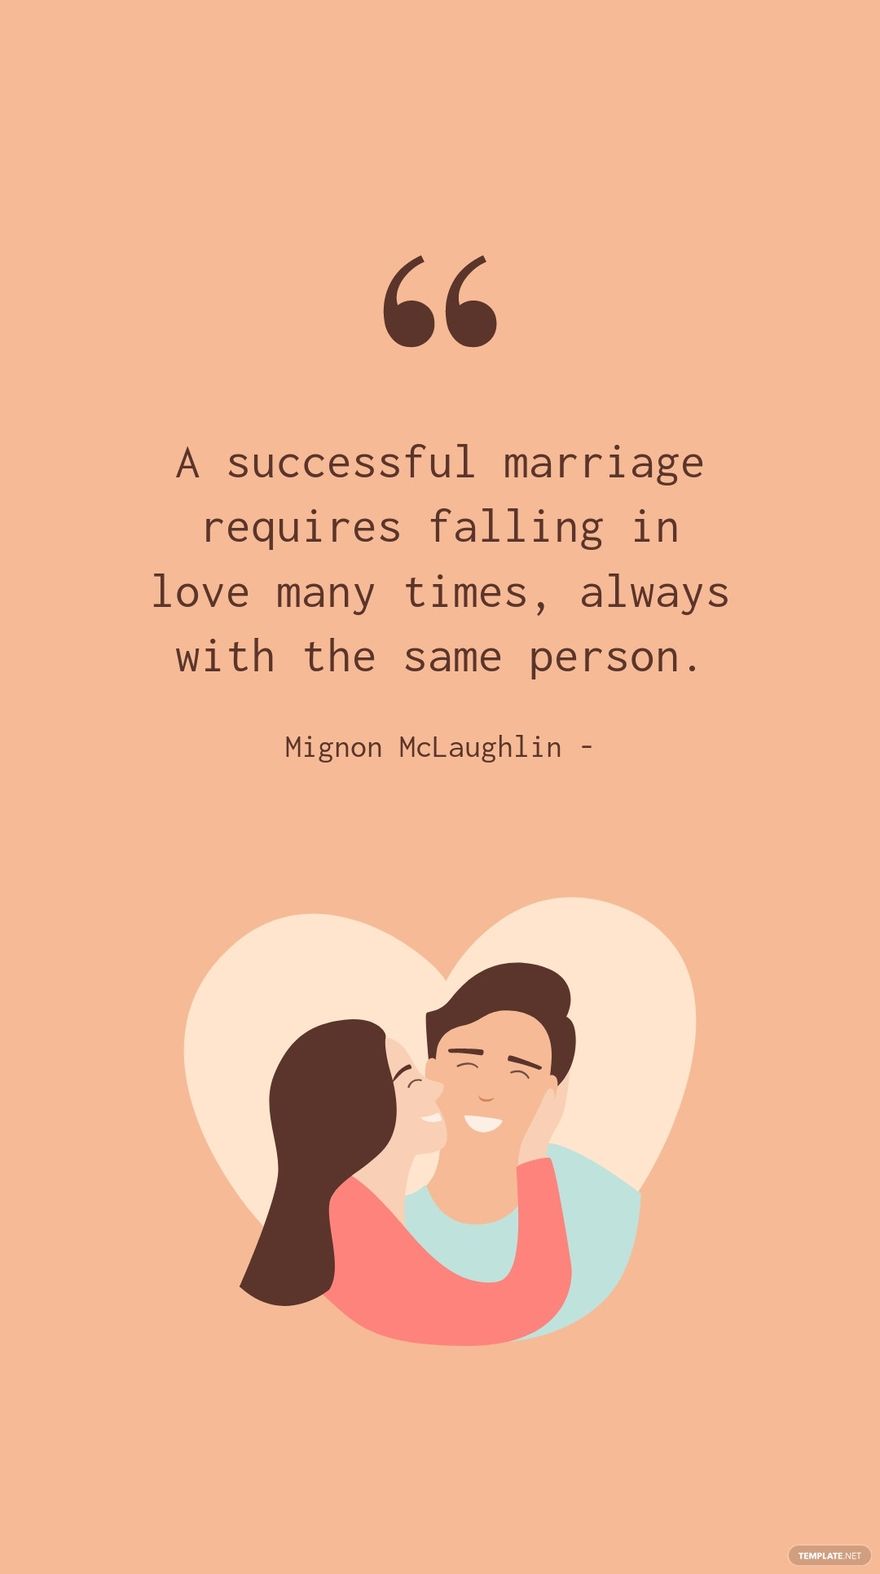 Mignon McLaughlin - A successful marriage requires falling in love many times, always with the same person.